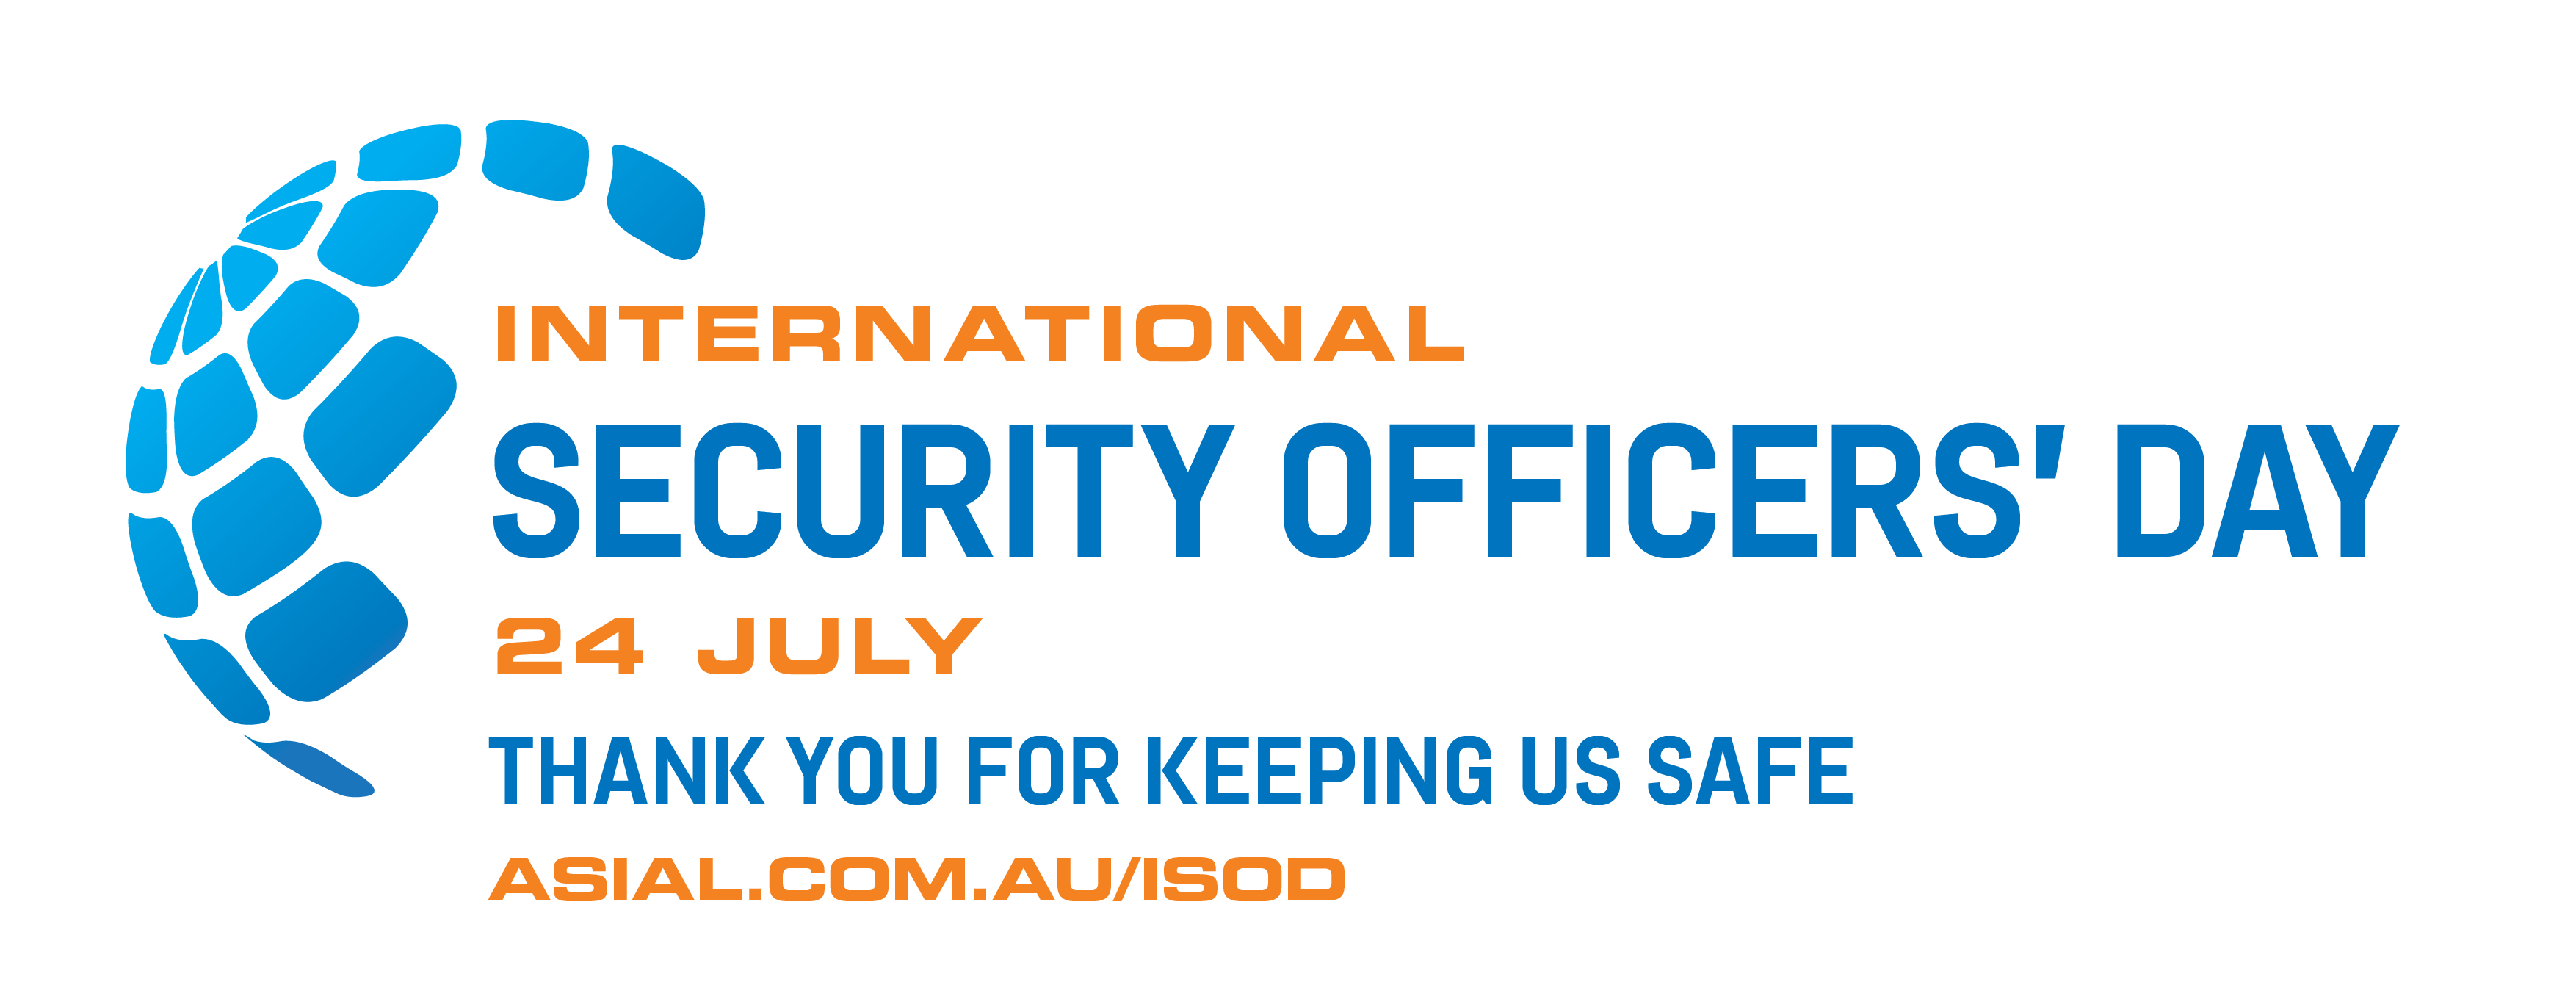 International Security Officers’ Day